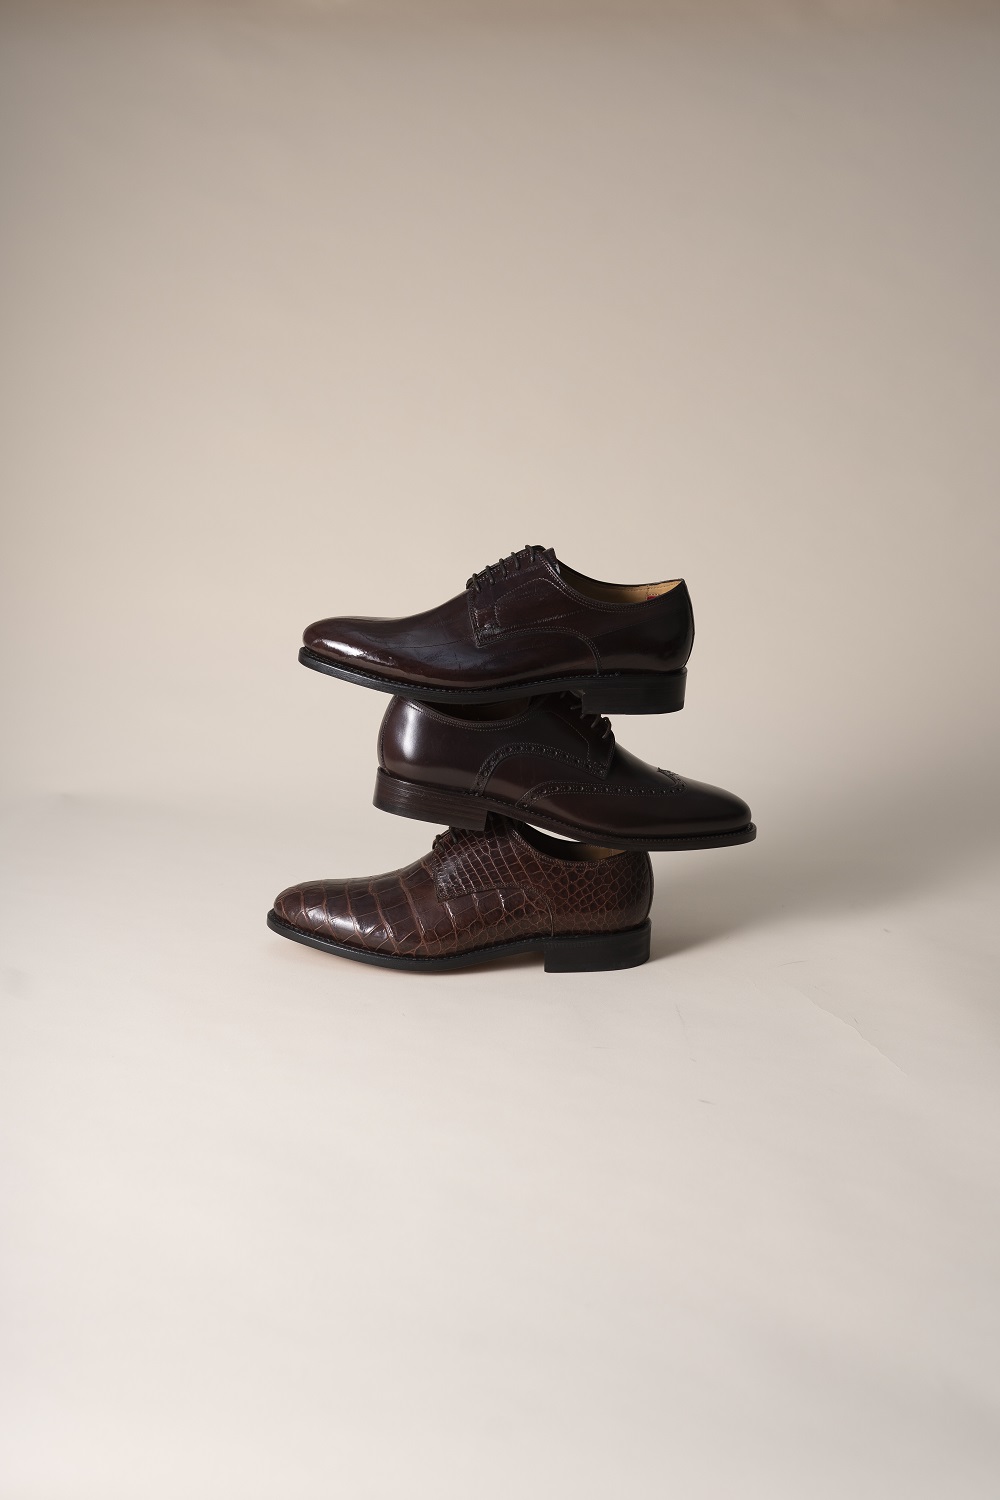 The perfect shoemaker for any man